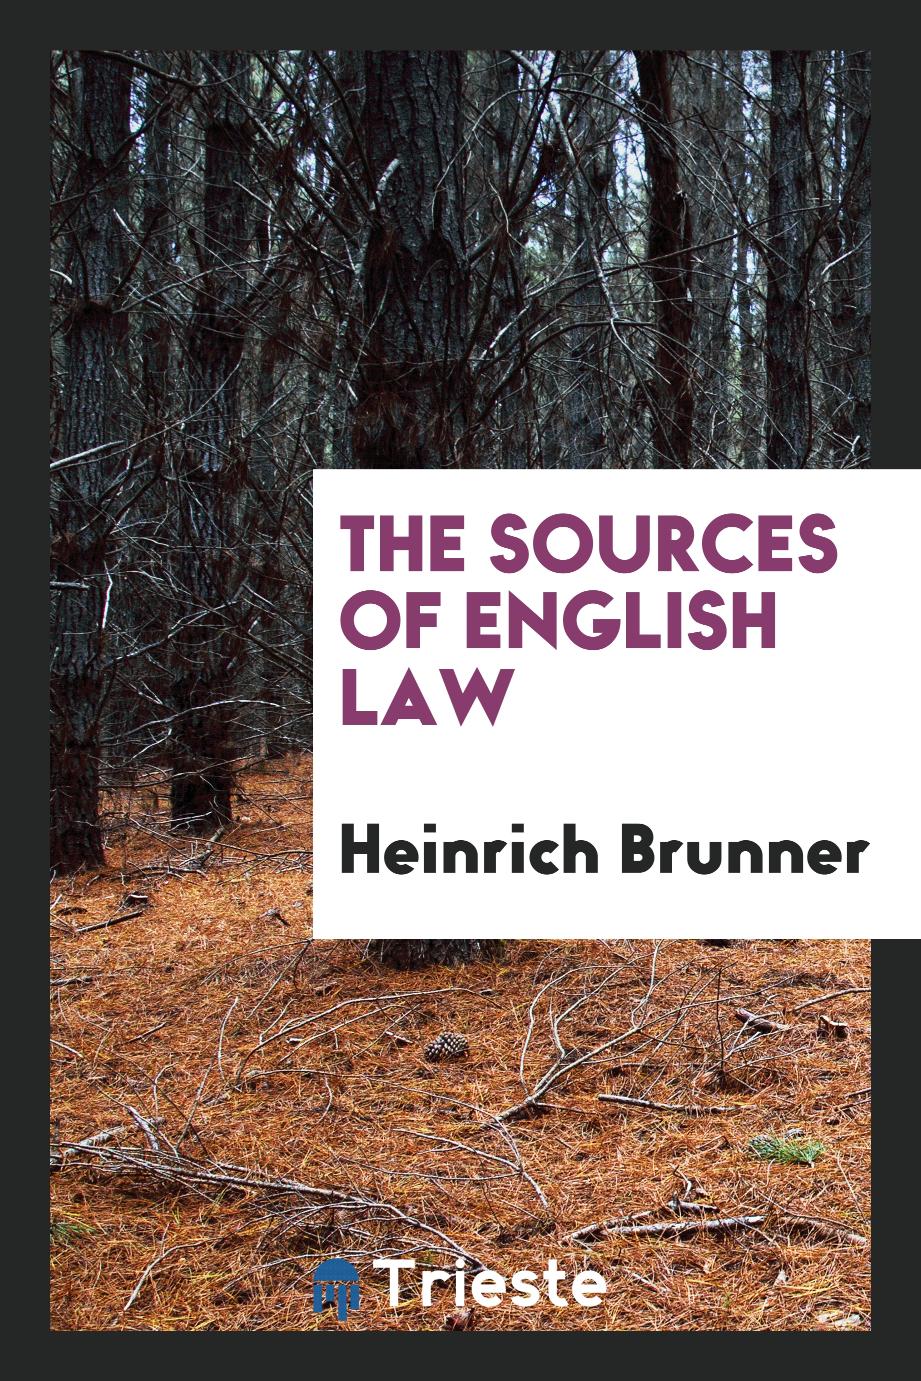 The Sources of English law